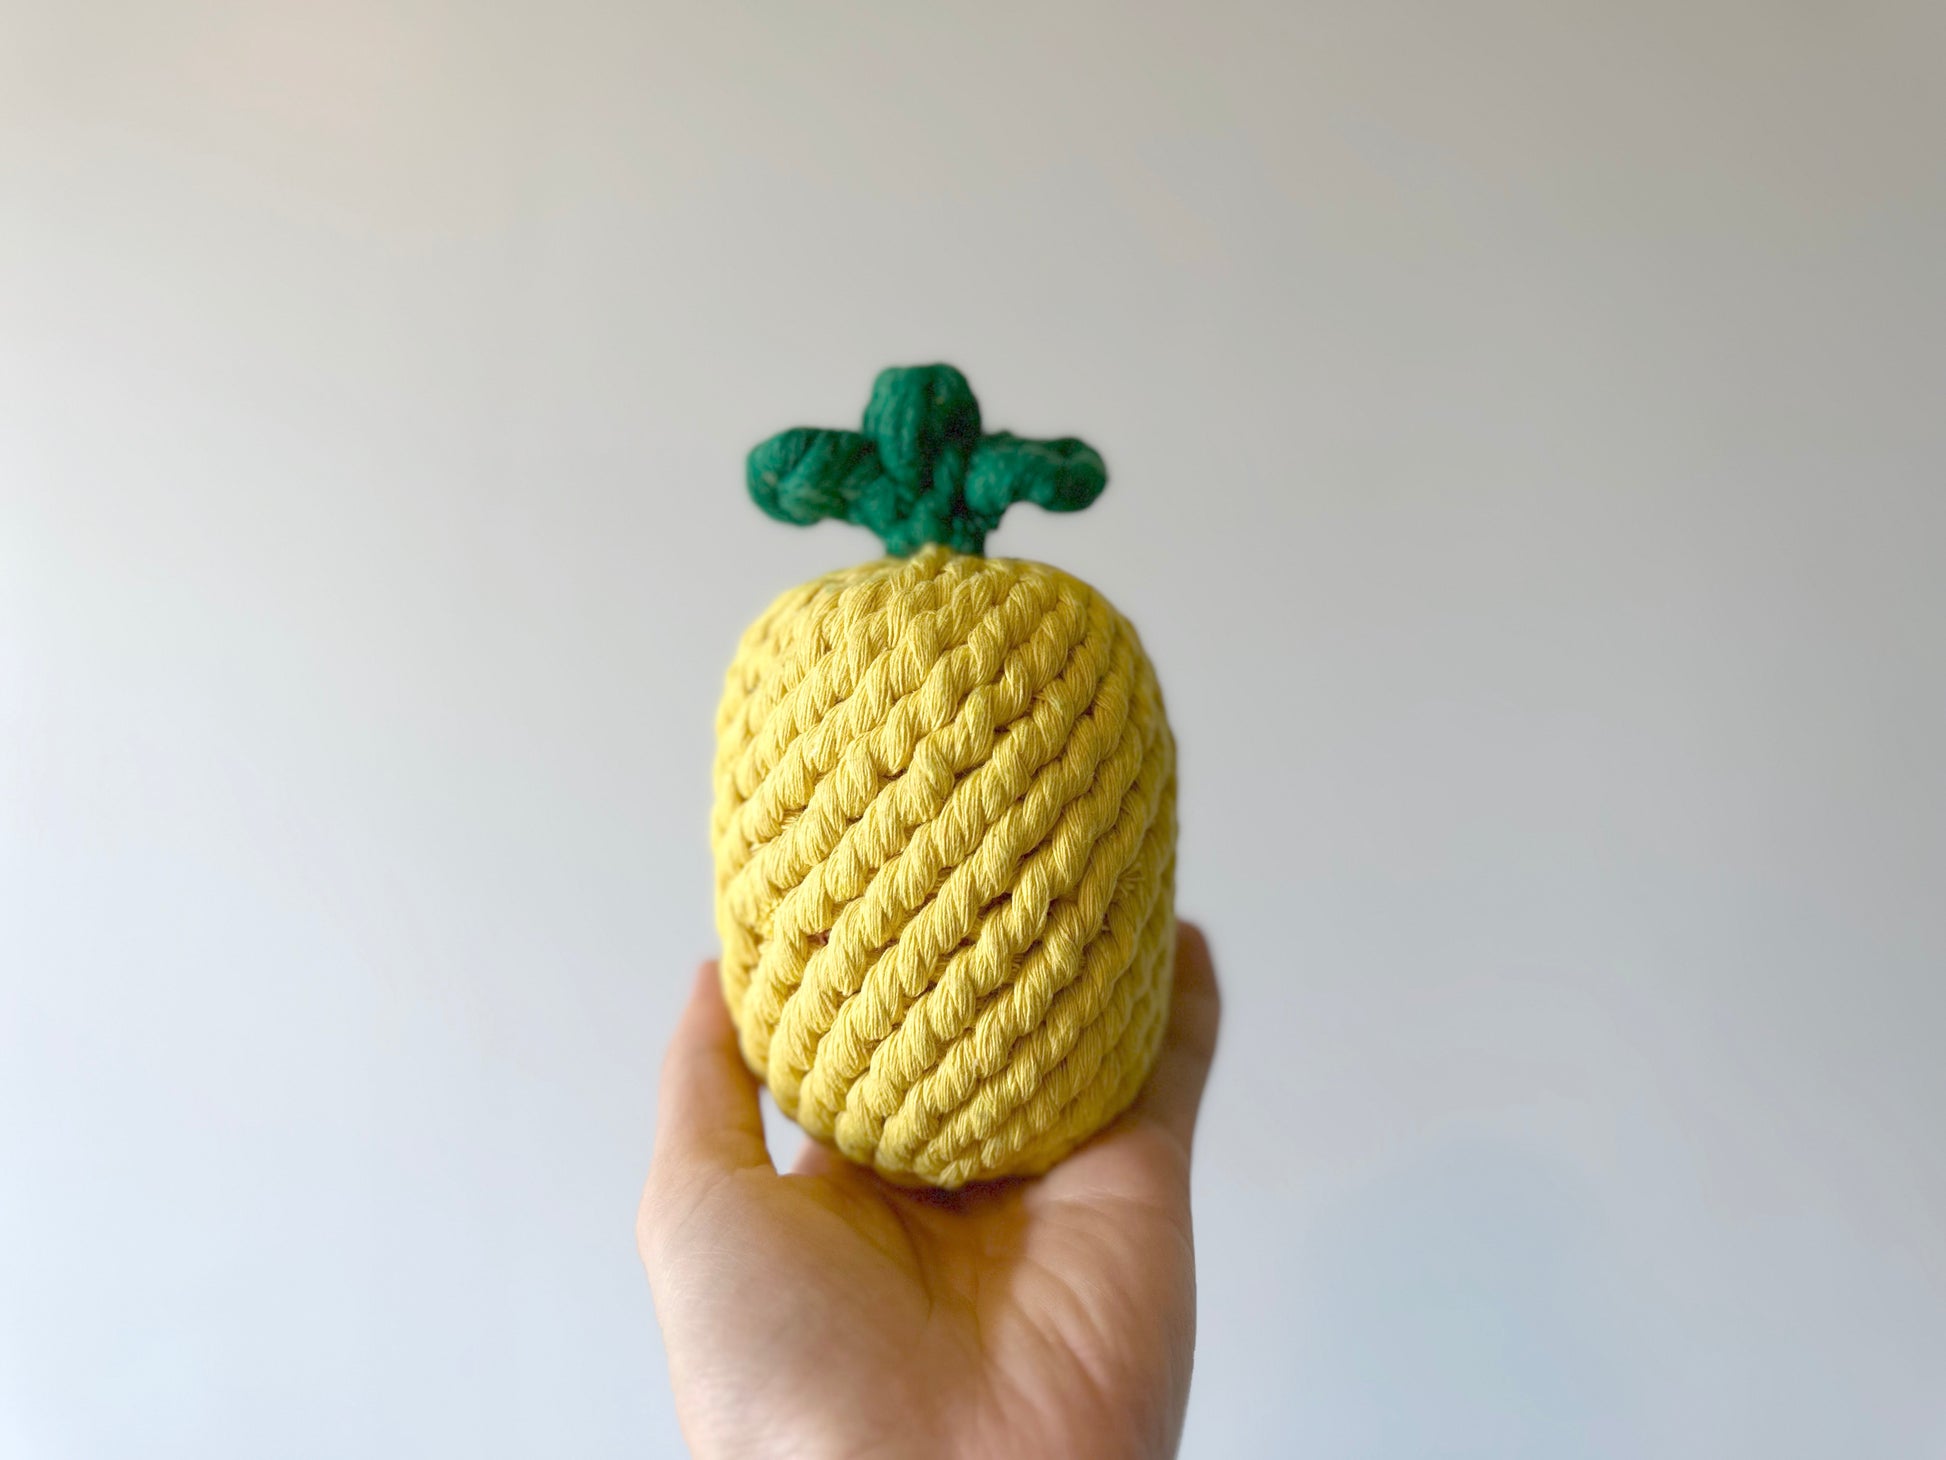 A pineapple-shaped pet toy made from durable cotton rope, perfect for chewing and interactive play, promoting dental health and keeping pets entertained.